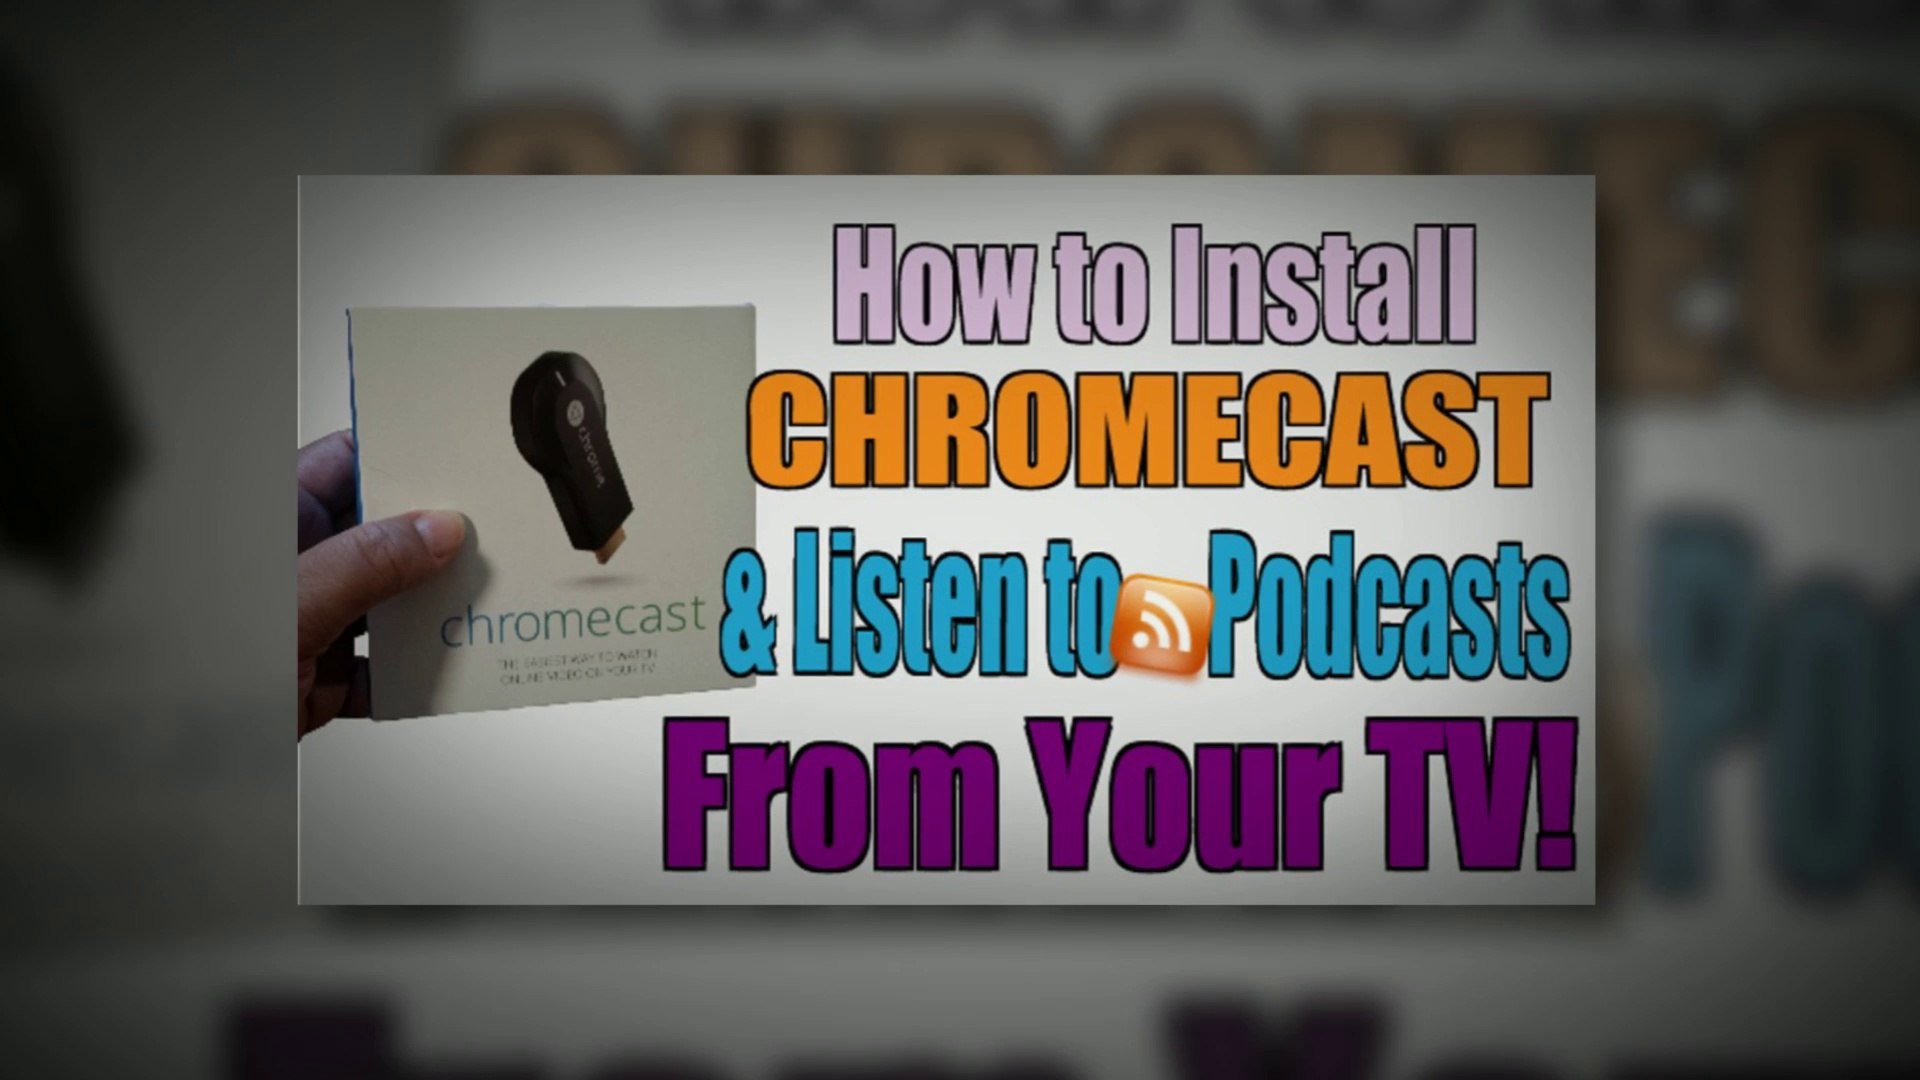 Lyrical Udtømning hensynsløs How To Install Chromecast to Listen to Podcasts on Your TV - video  Dailymotion